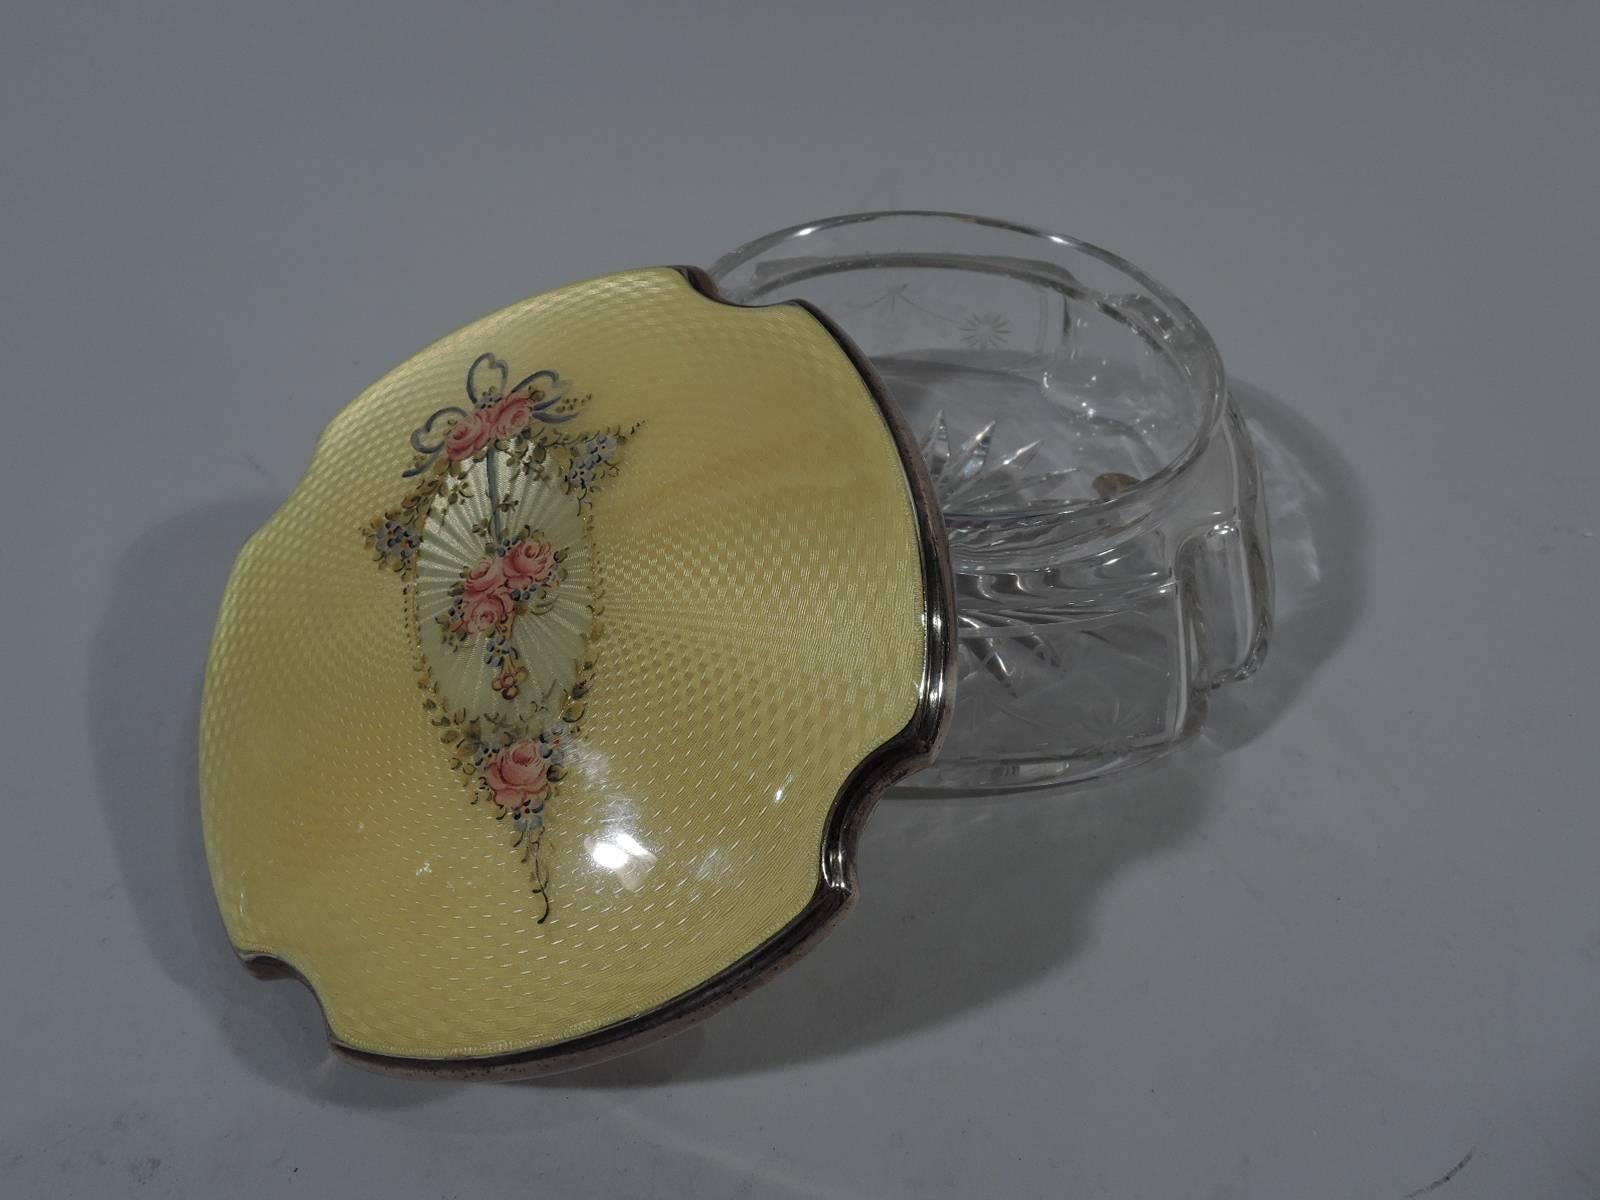 Edwardian clear glass powder jar with sterling silver and enamel cover. Made by Thomae in Attleboro, Mass., circa 1920. Jar has four curved and upward sides with concave corners. Garlands acid-etched on sides and star cut to bottom. Cover top has